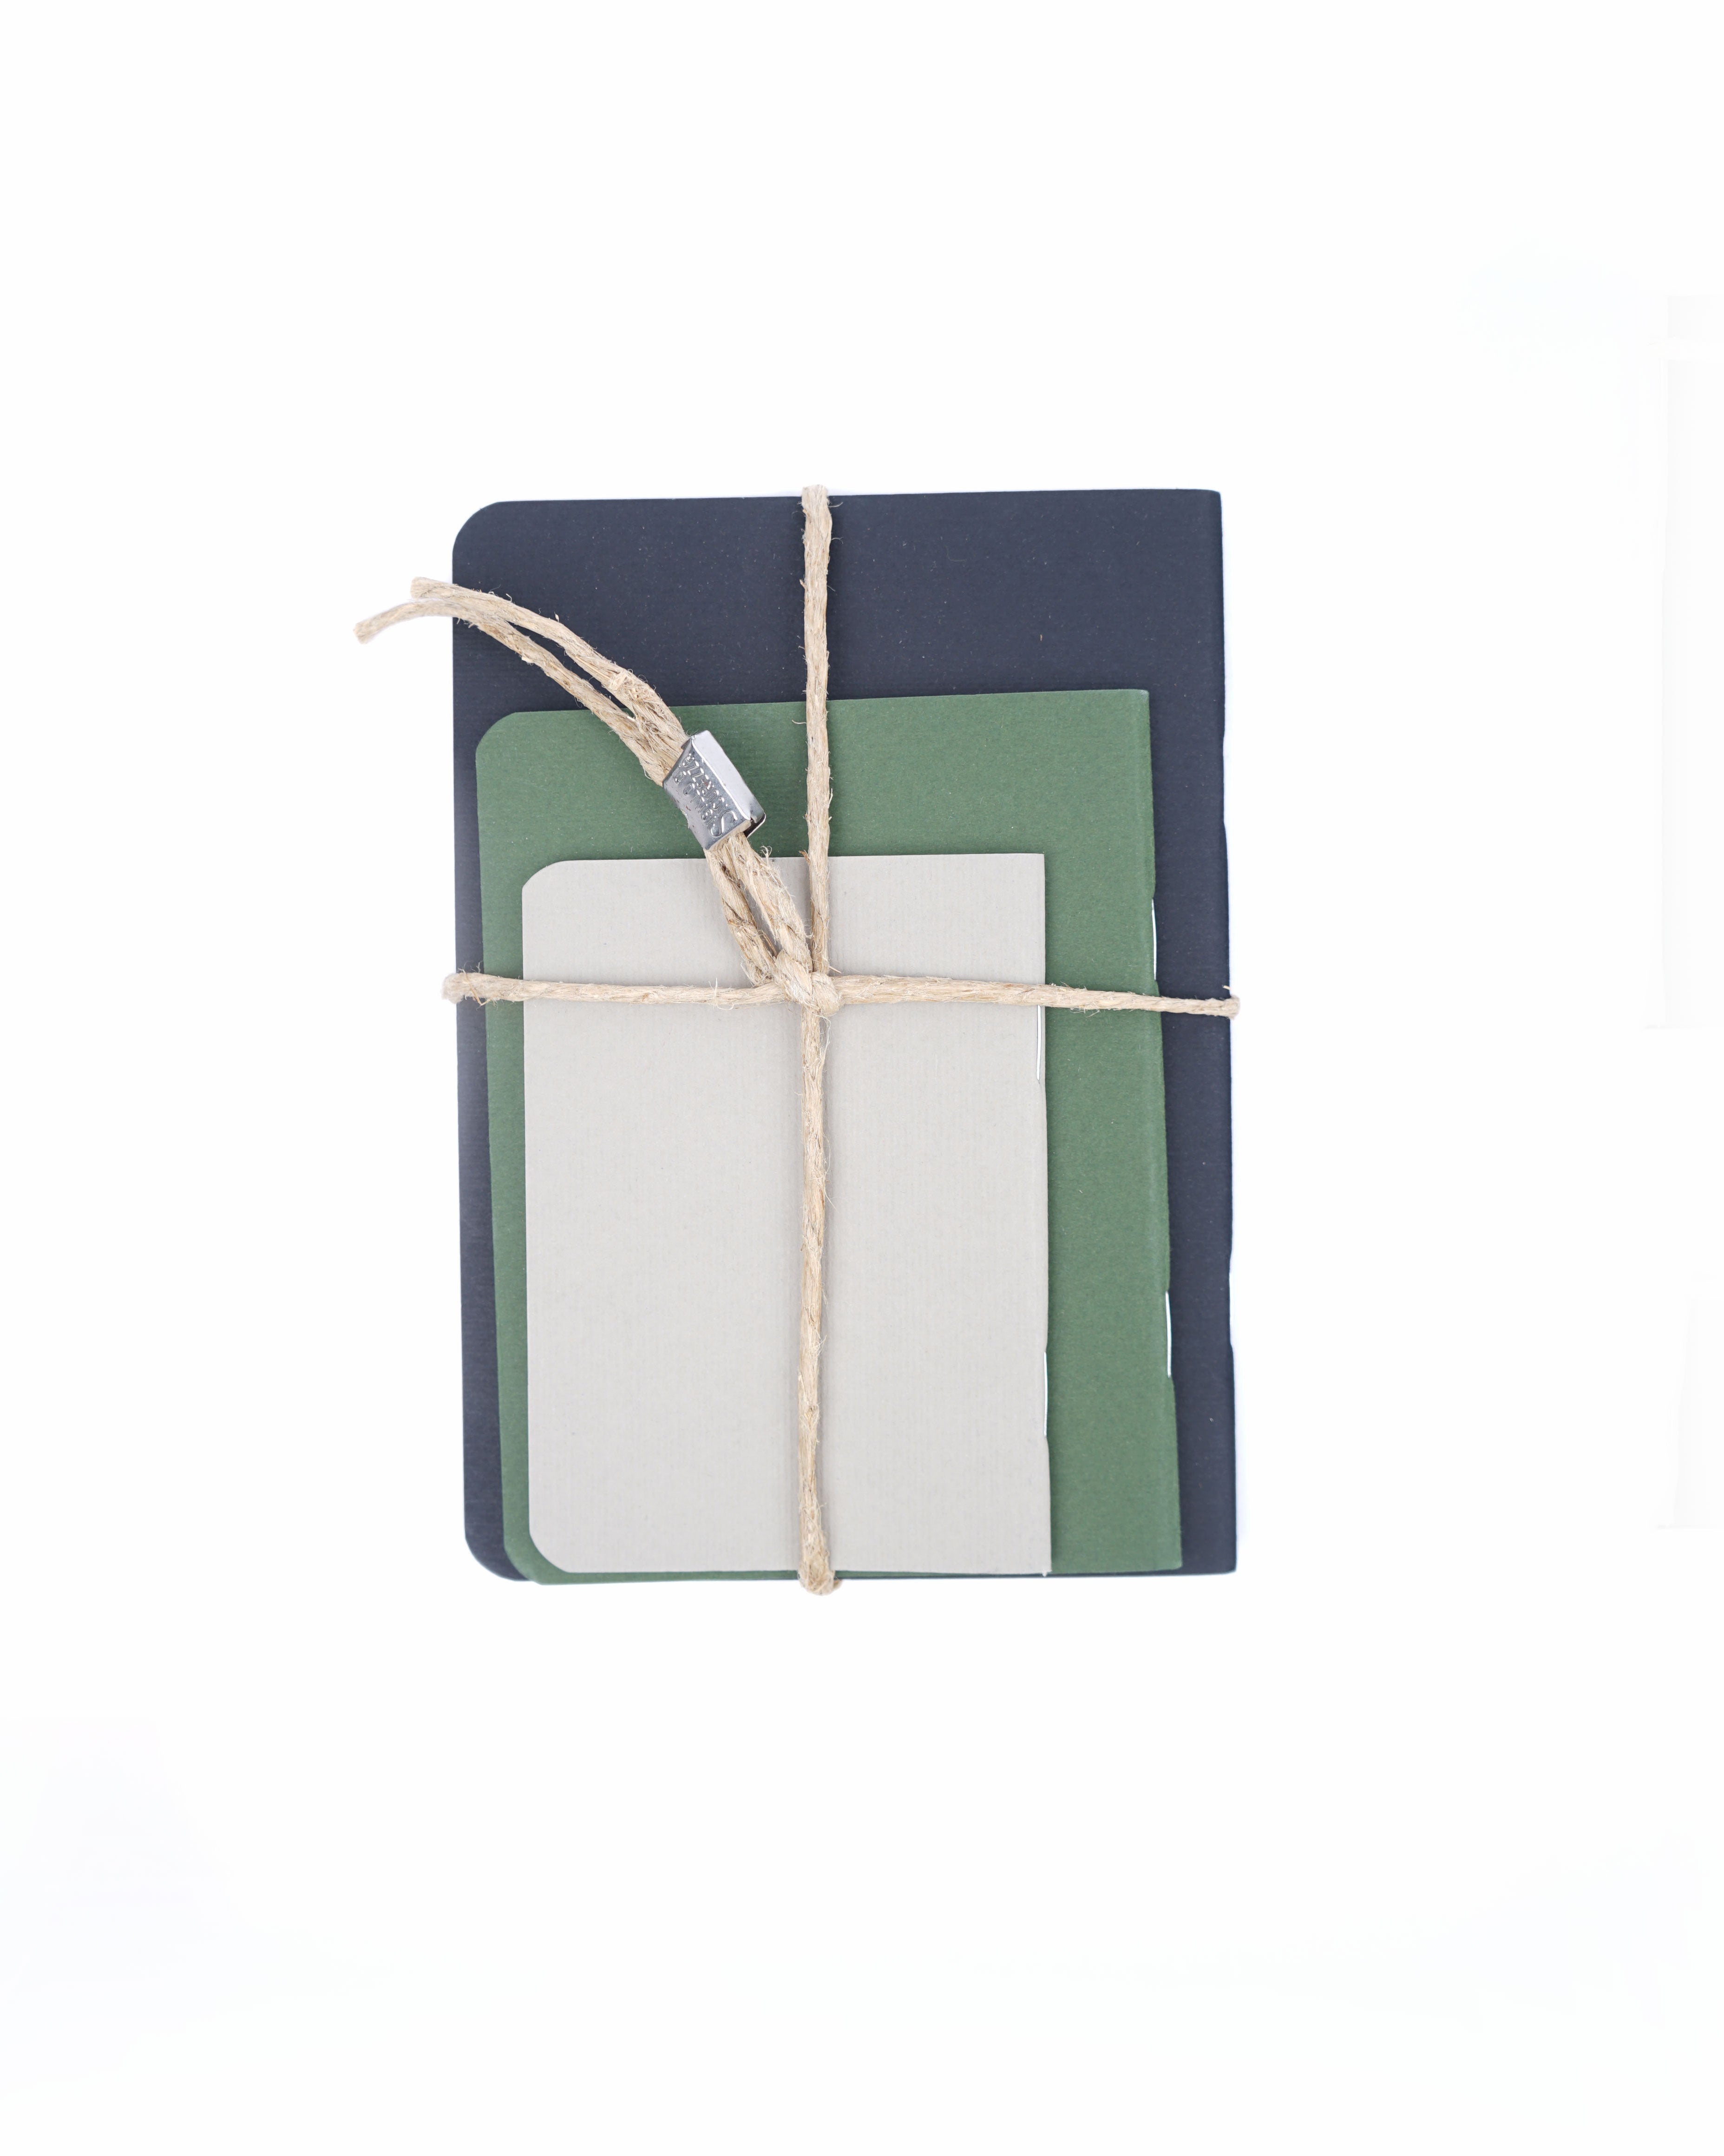 Set of 3 books with rope twine - Light grey, Green, Black